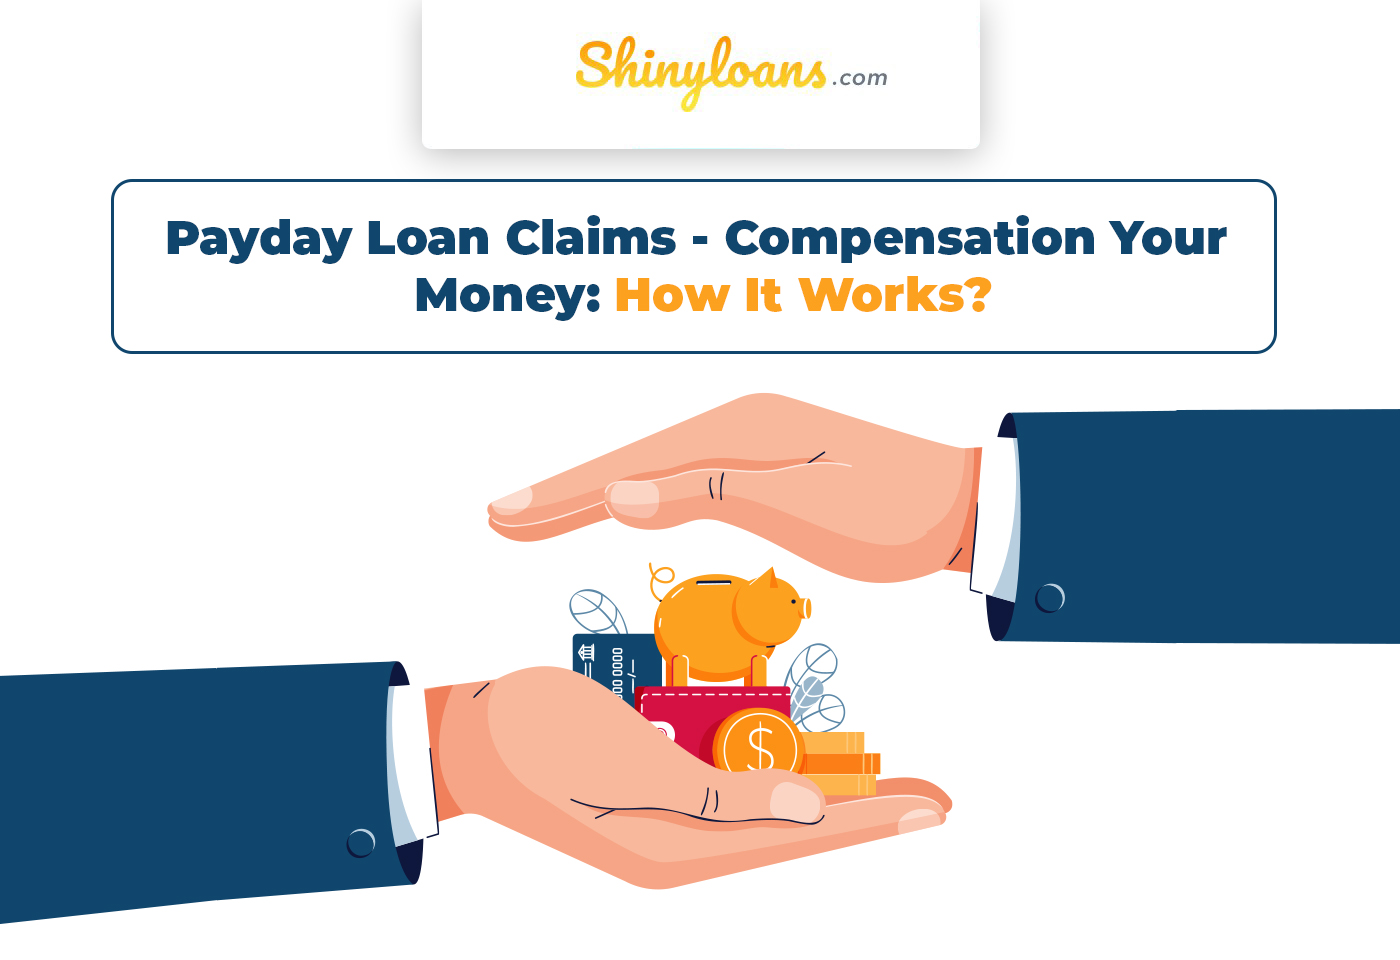 Payday Loan Claims - Compensation of Your Money: How It Works?